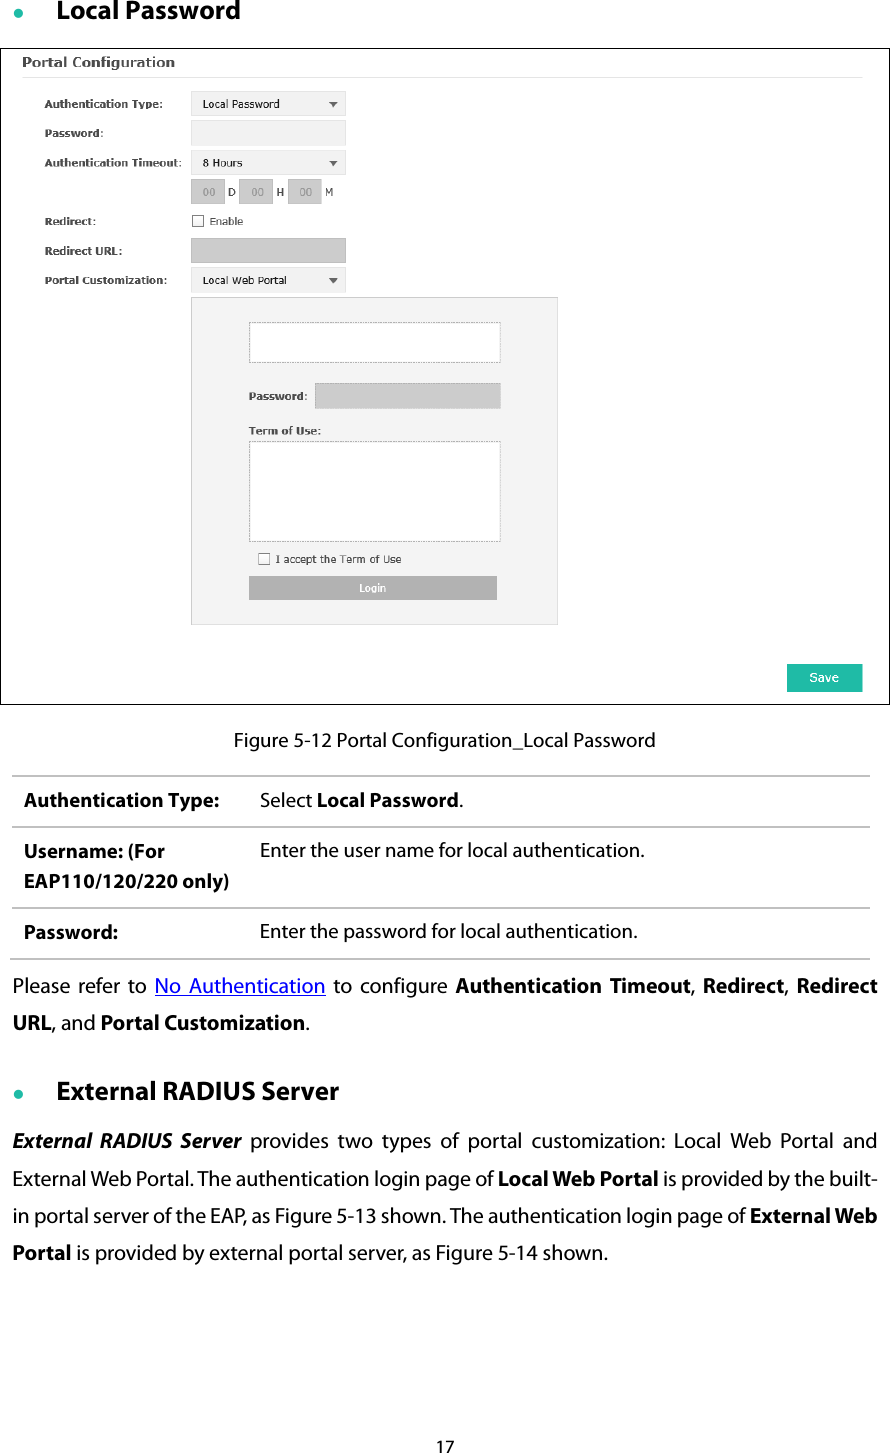  Local Password  Figure 5-12 Portal Configuration_Local Password Authentication Type:  Select Local Password. Username: (For EAP110/120/220 only) Enter the user name for local authentication. Password:  Enter the password for local authentication. Please refer to No Authentication to configure Authentication Timeout,  Redirect, Redirect URL, and Portal Customization.  External RADIUS Server External  RADIUS Server provides two types of portal customization:  Local Web Portal and External Web Portal. The authentication login page of Local Web Portal is provided by the built-in portal server of the EAP, as Figure 5-13 shown. The authentication login page of External Web Portal is provided by external portal server, as Figure 5-14 shown. 17  